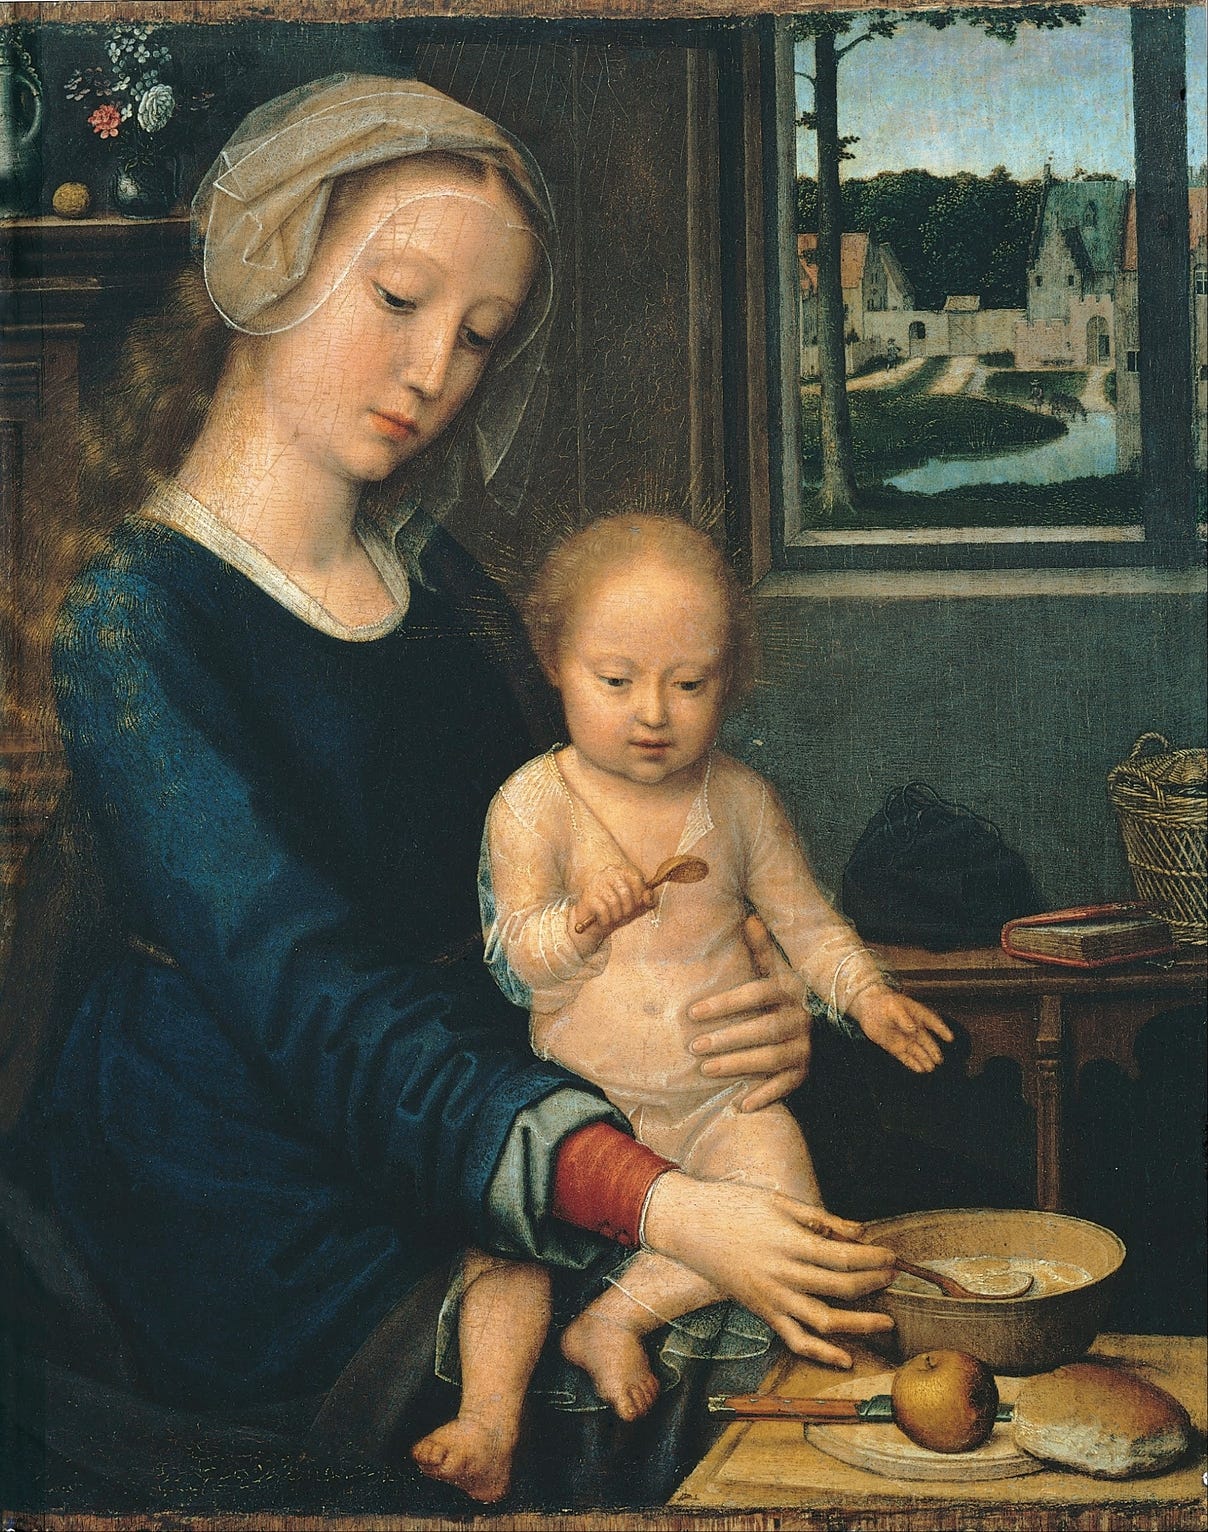 Madonna and Child with the Milk Soup (1510-1515) by Gerard David (Dutch, 1460-1523)